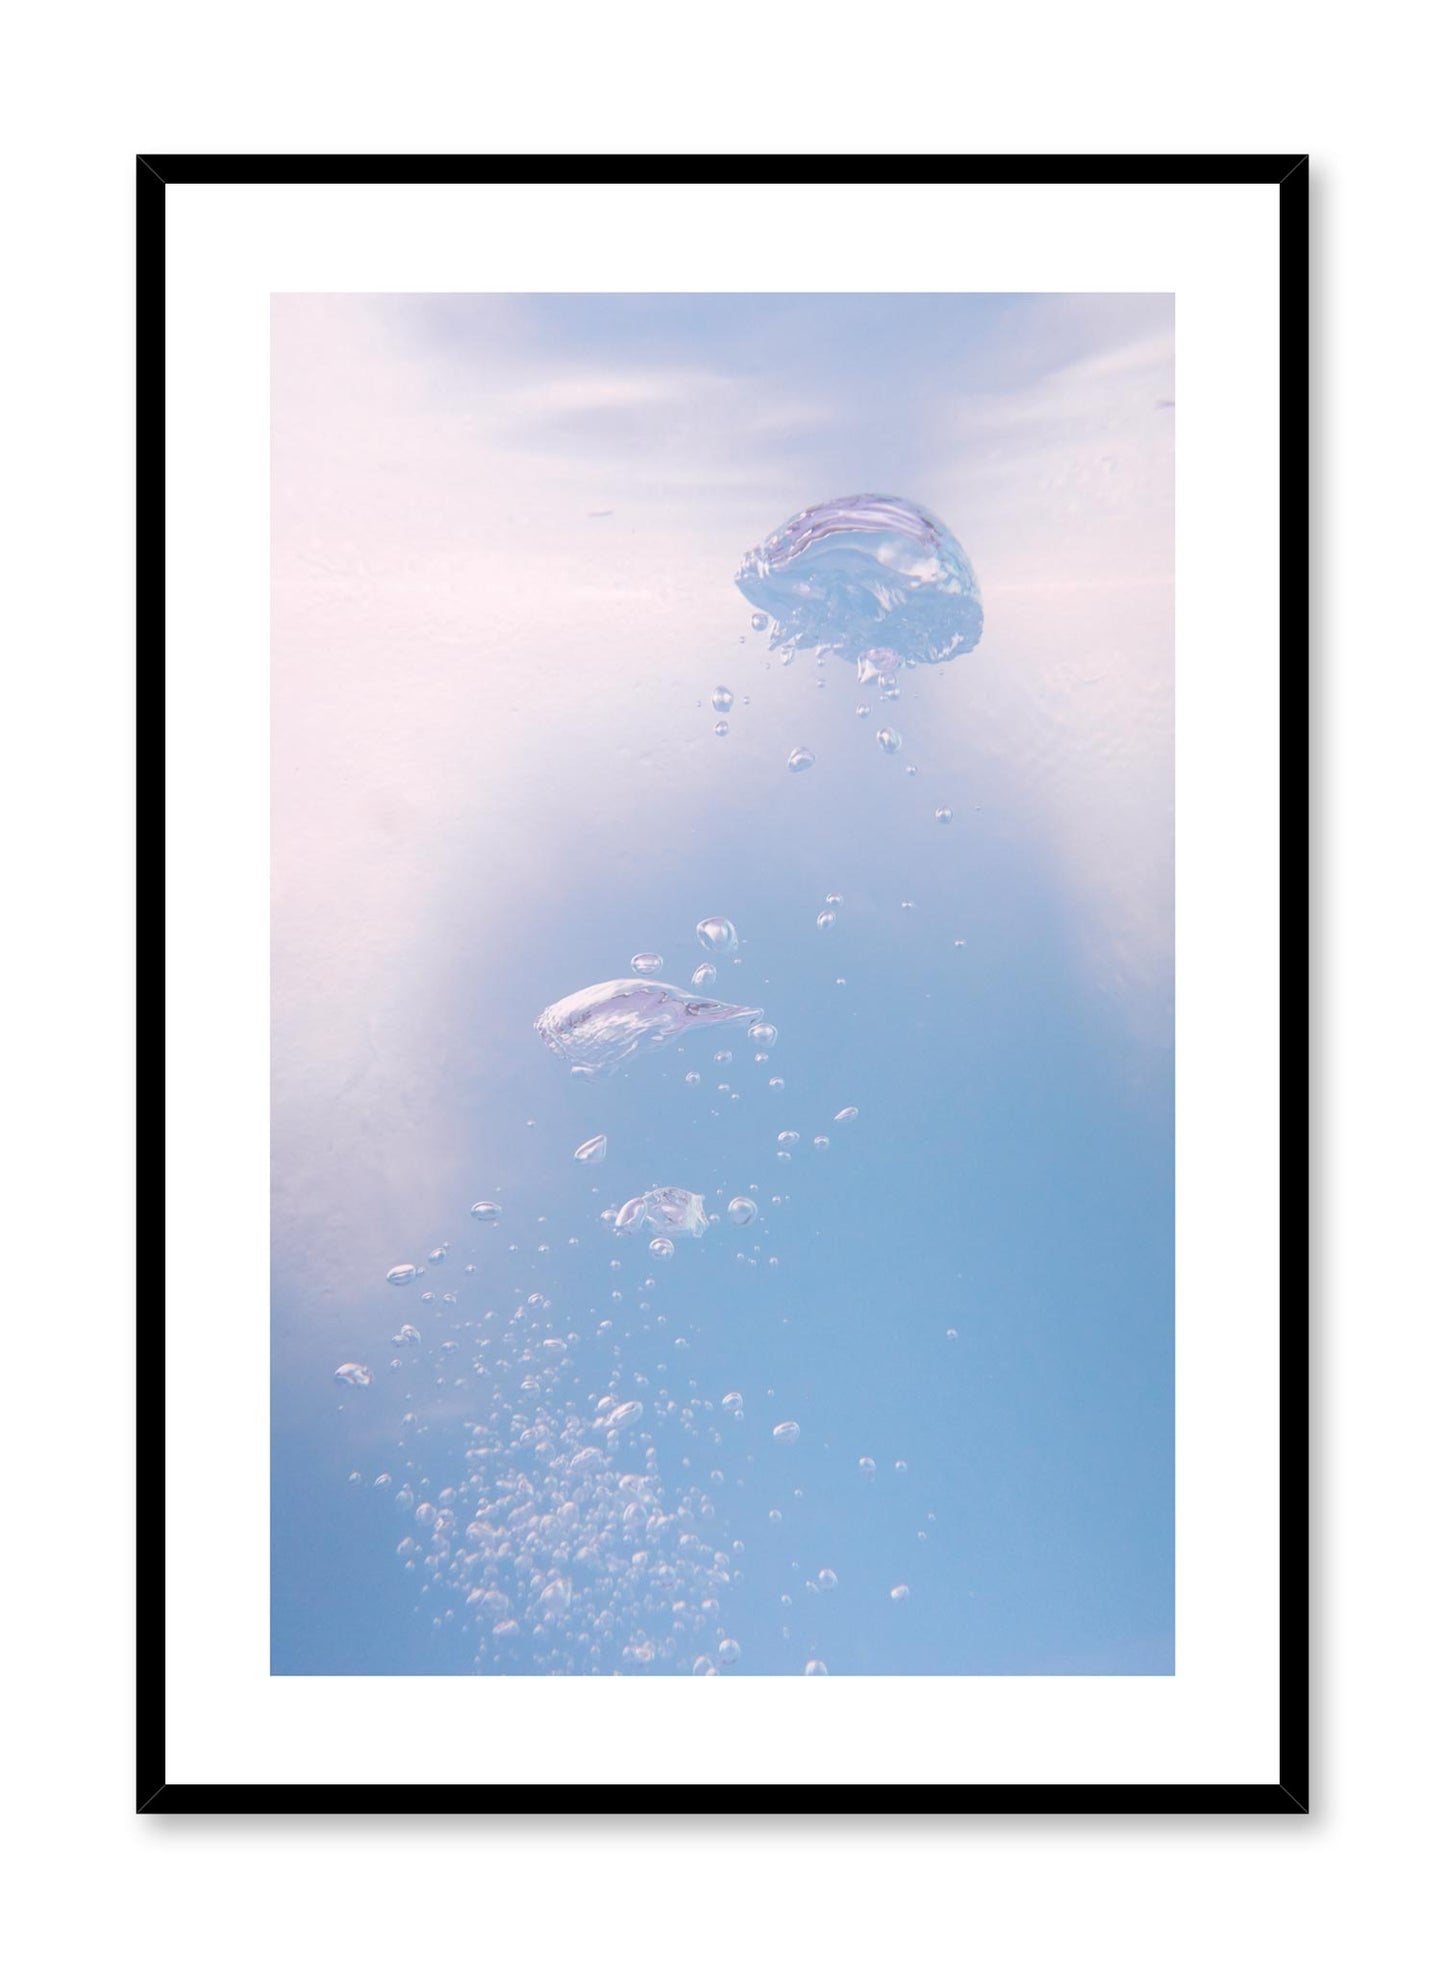 Minimalist design poster by Opposite Wall with nature photography of bubbles in the water